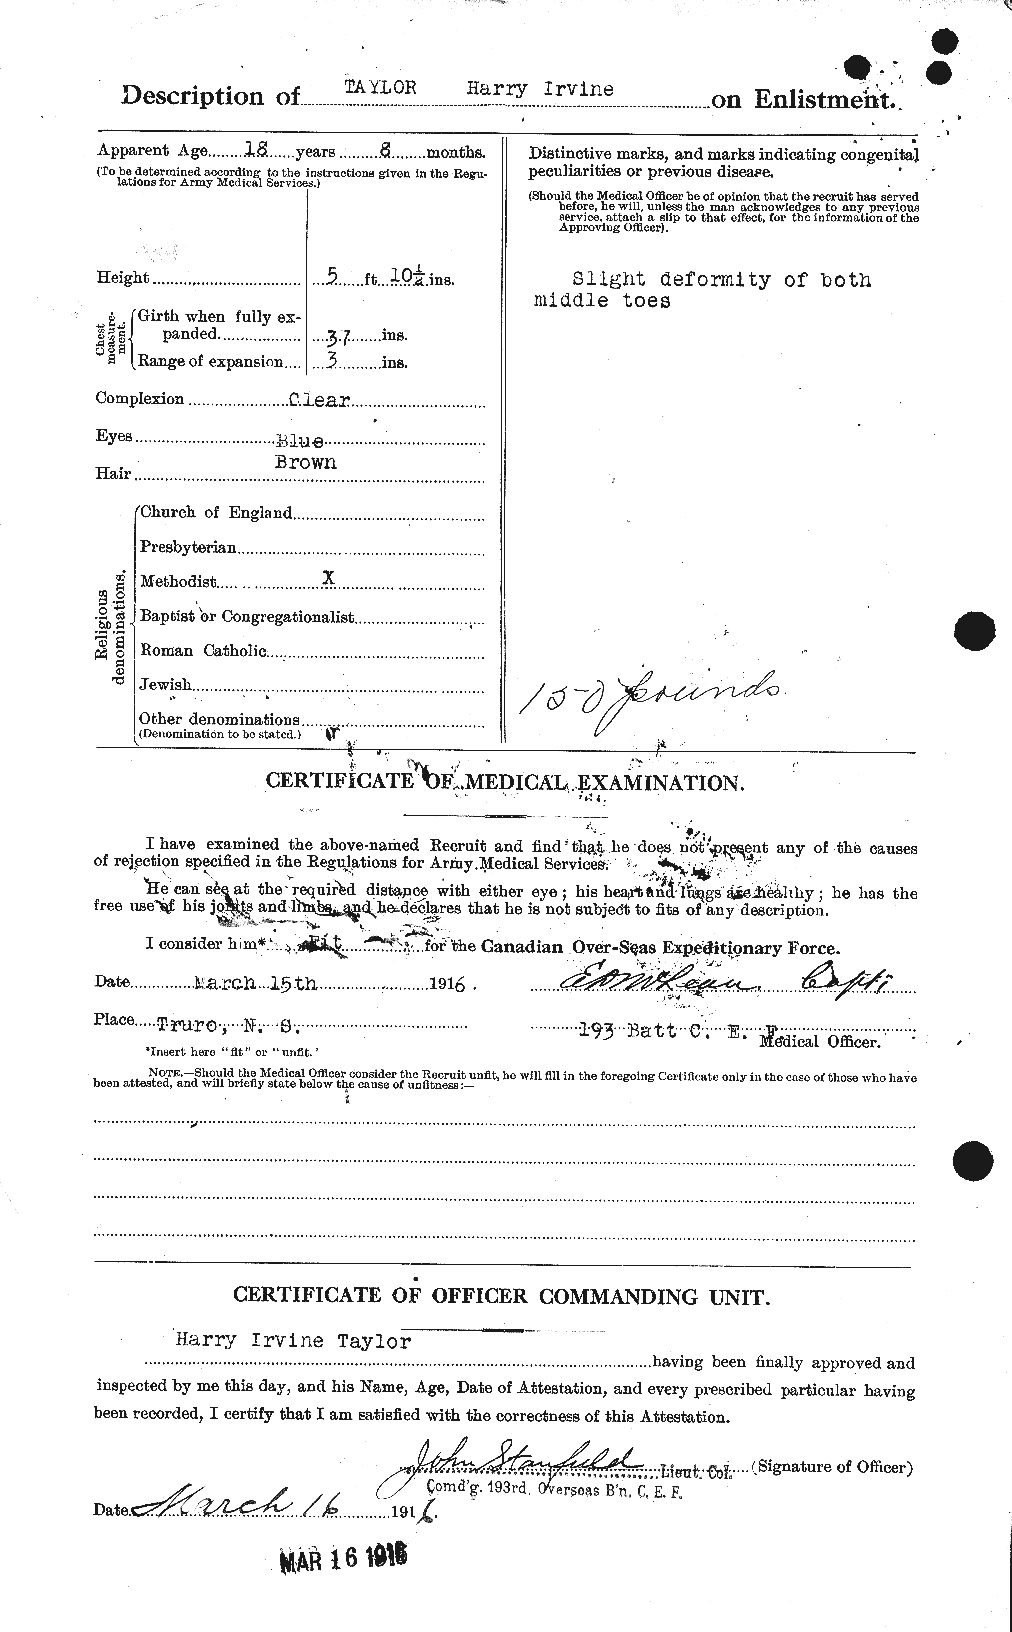 Personnel Records of the First World War - CEF 626497b